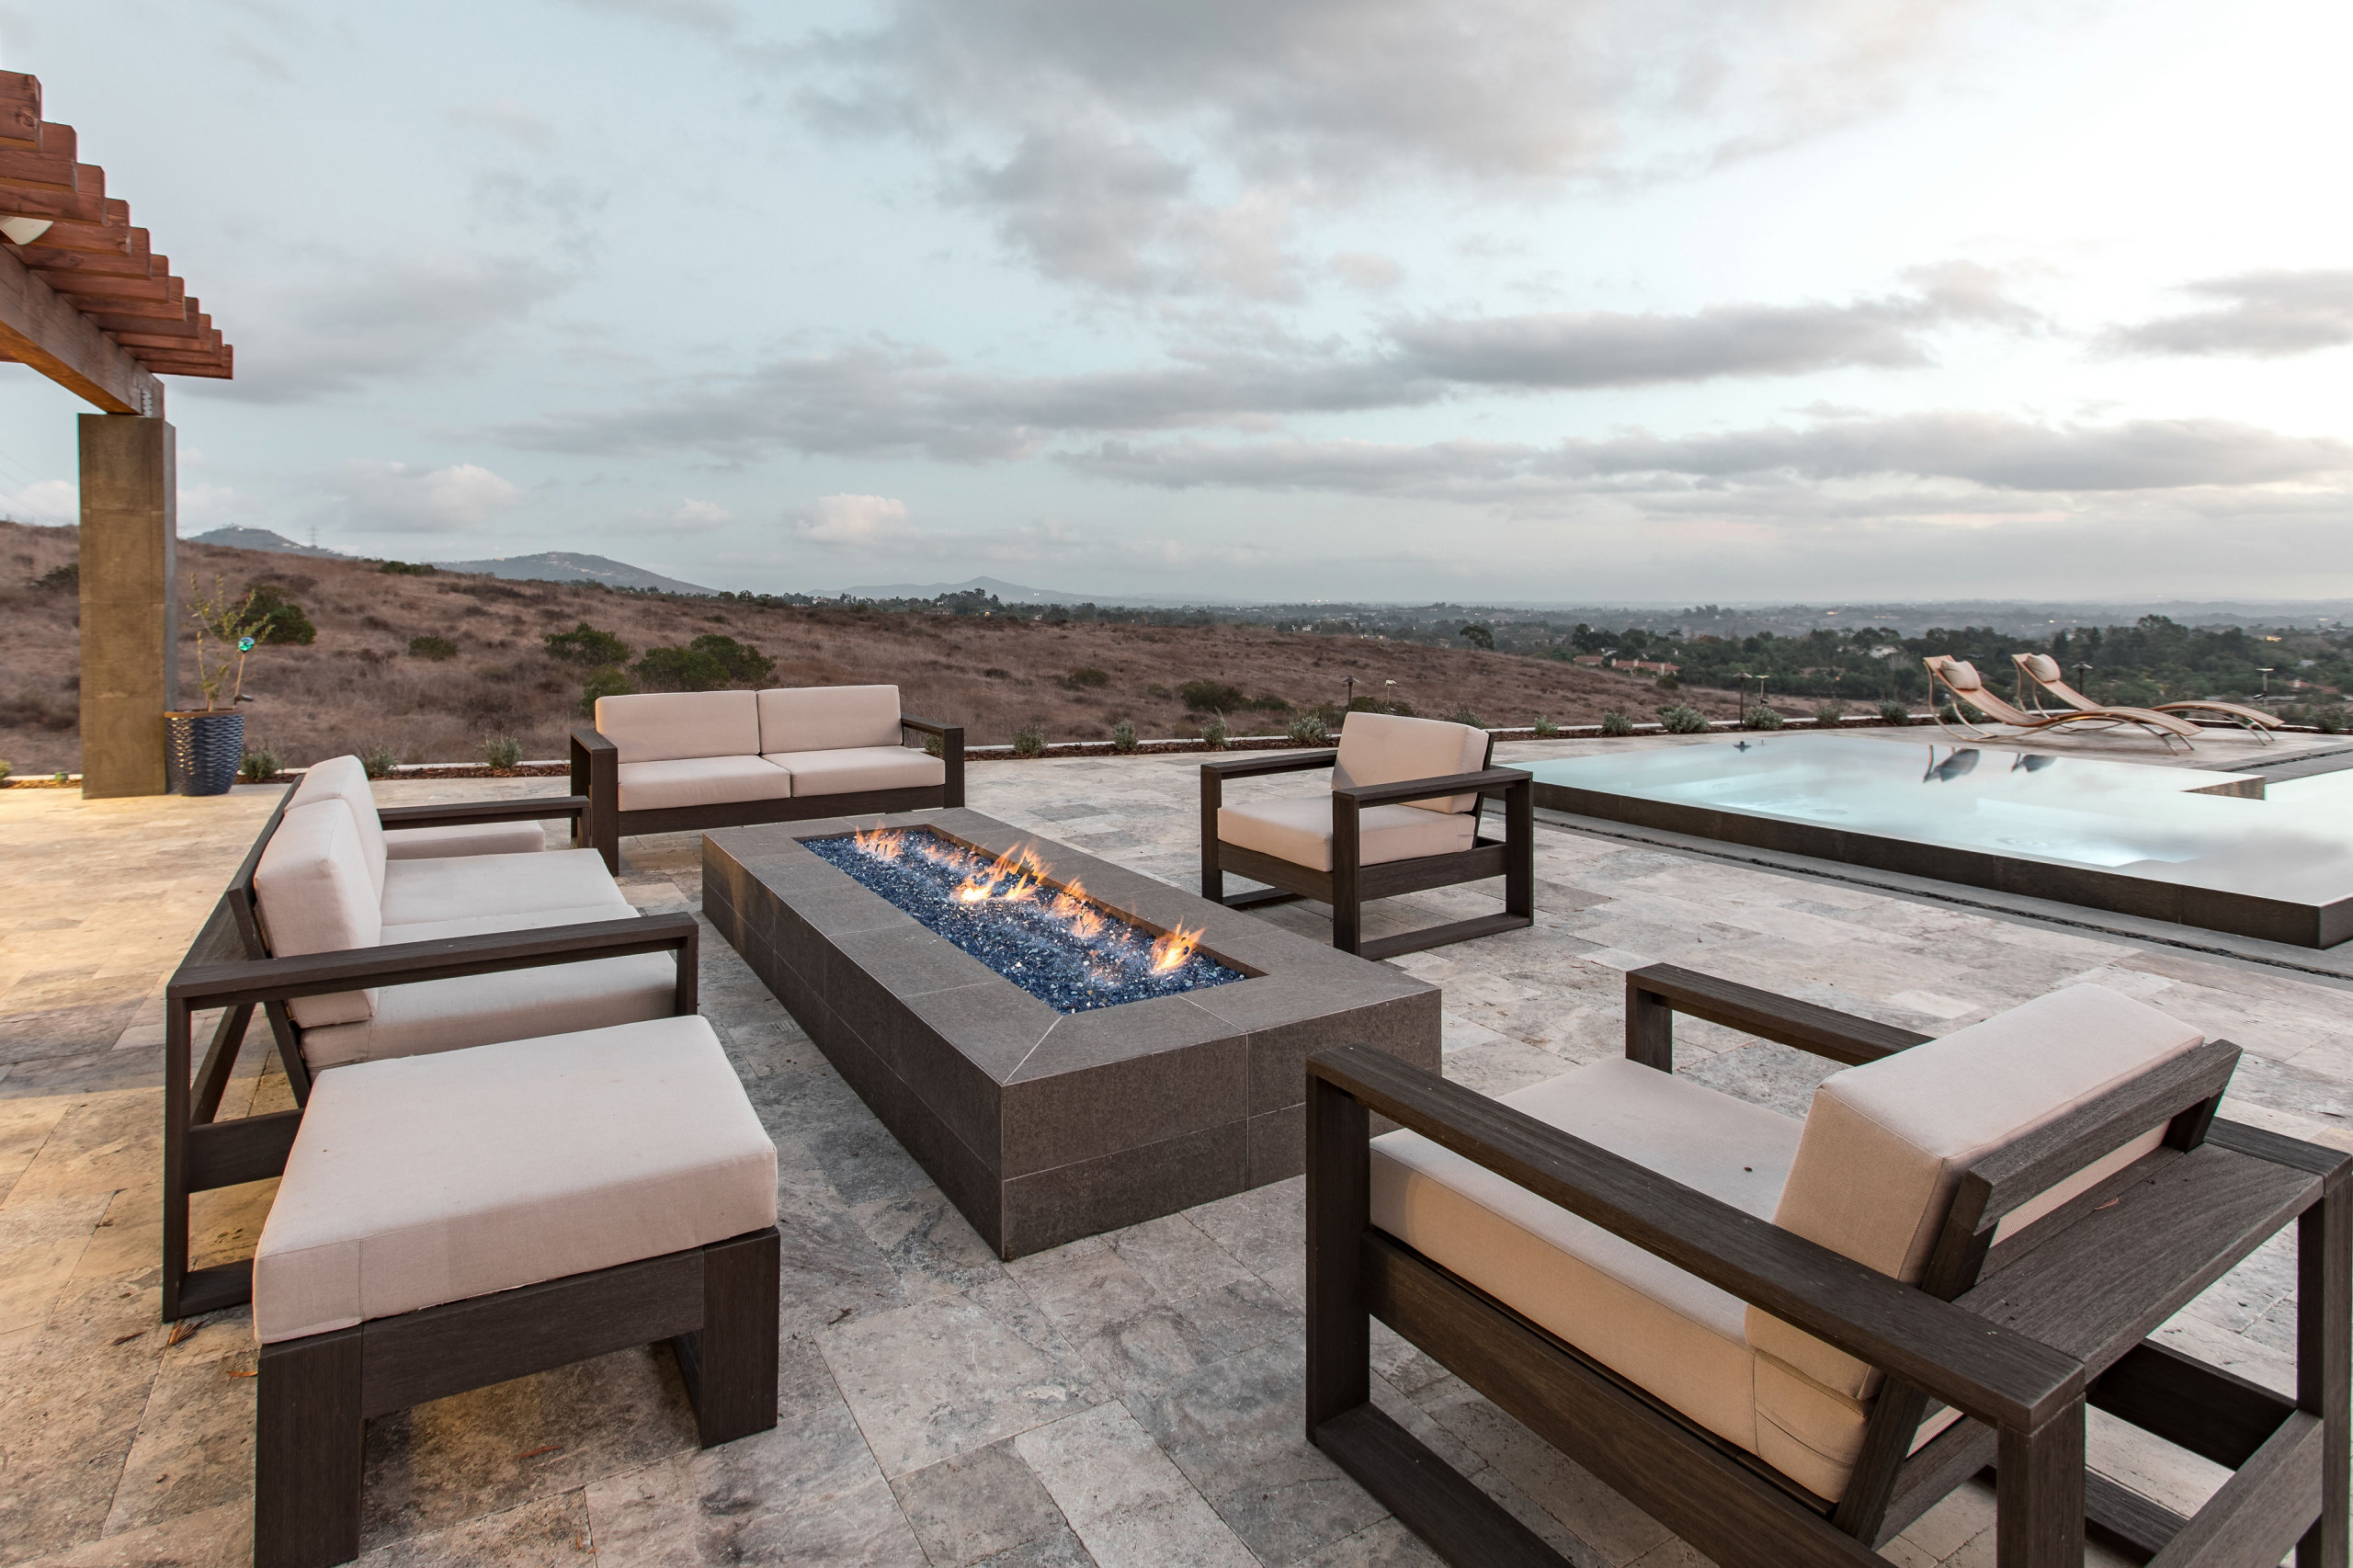 Gorgeous Infinity Pool with mulitple outdoor living spaces